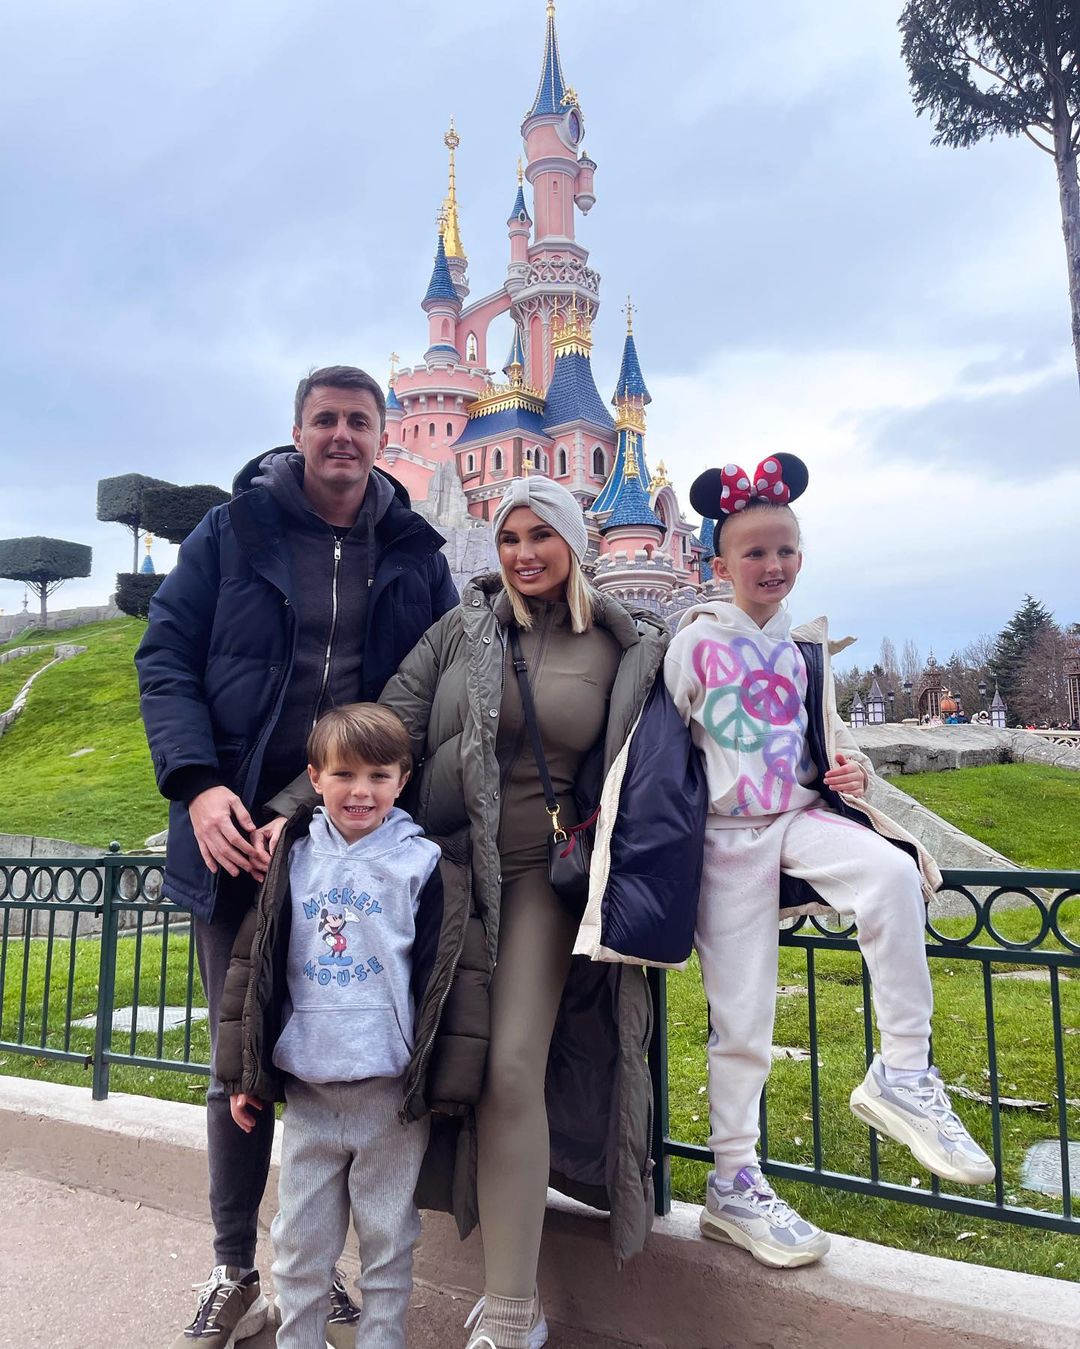 They recently visited Disneyland Paris and The Maldives